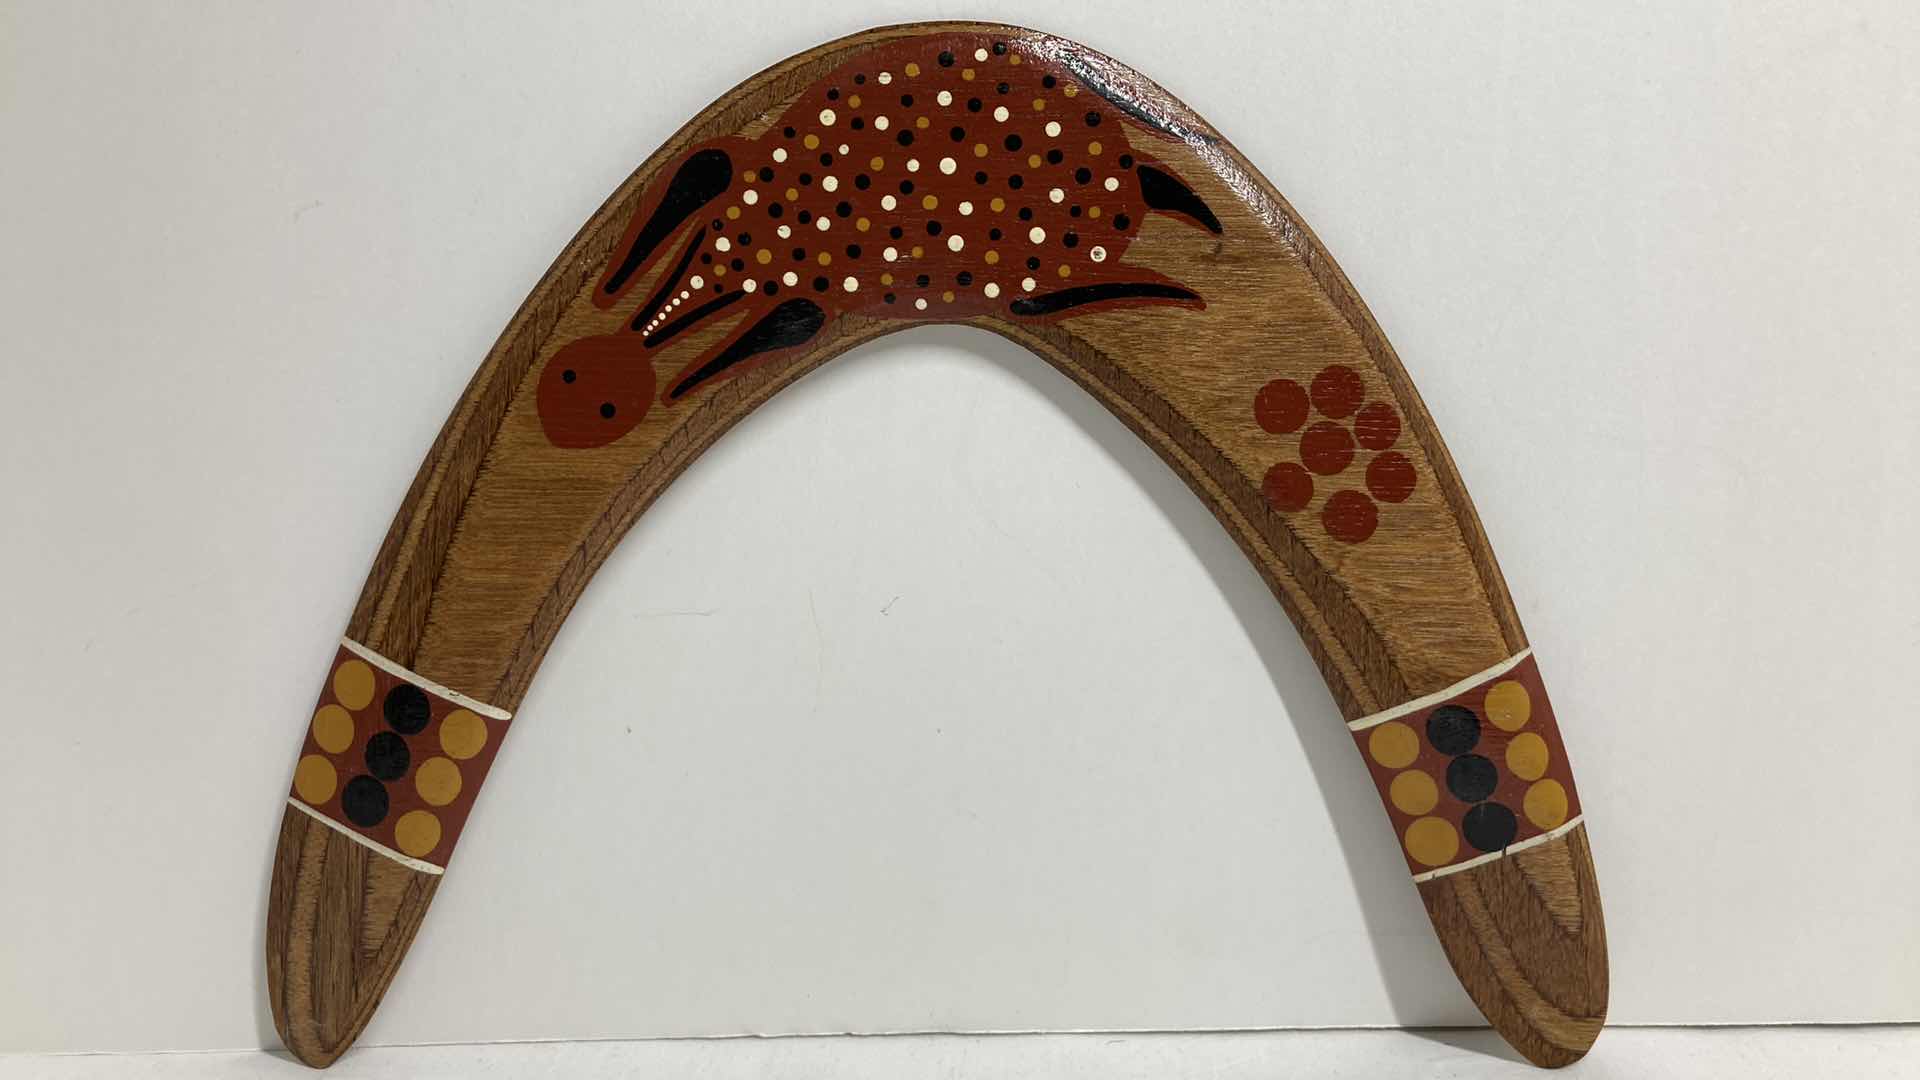 Photo 1 of WOODEN HAND PAINTED BOOMERANG BY CORRINE J. ARCHER 1999 12.75” X 9.75”